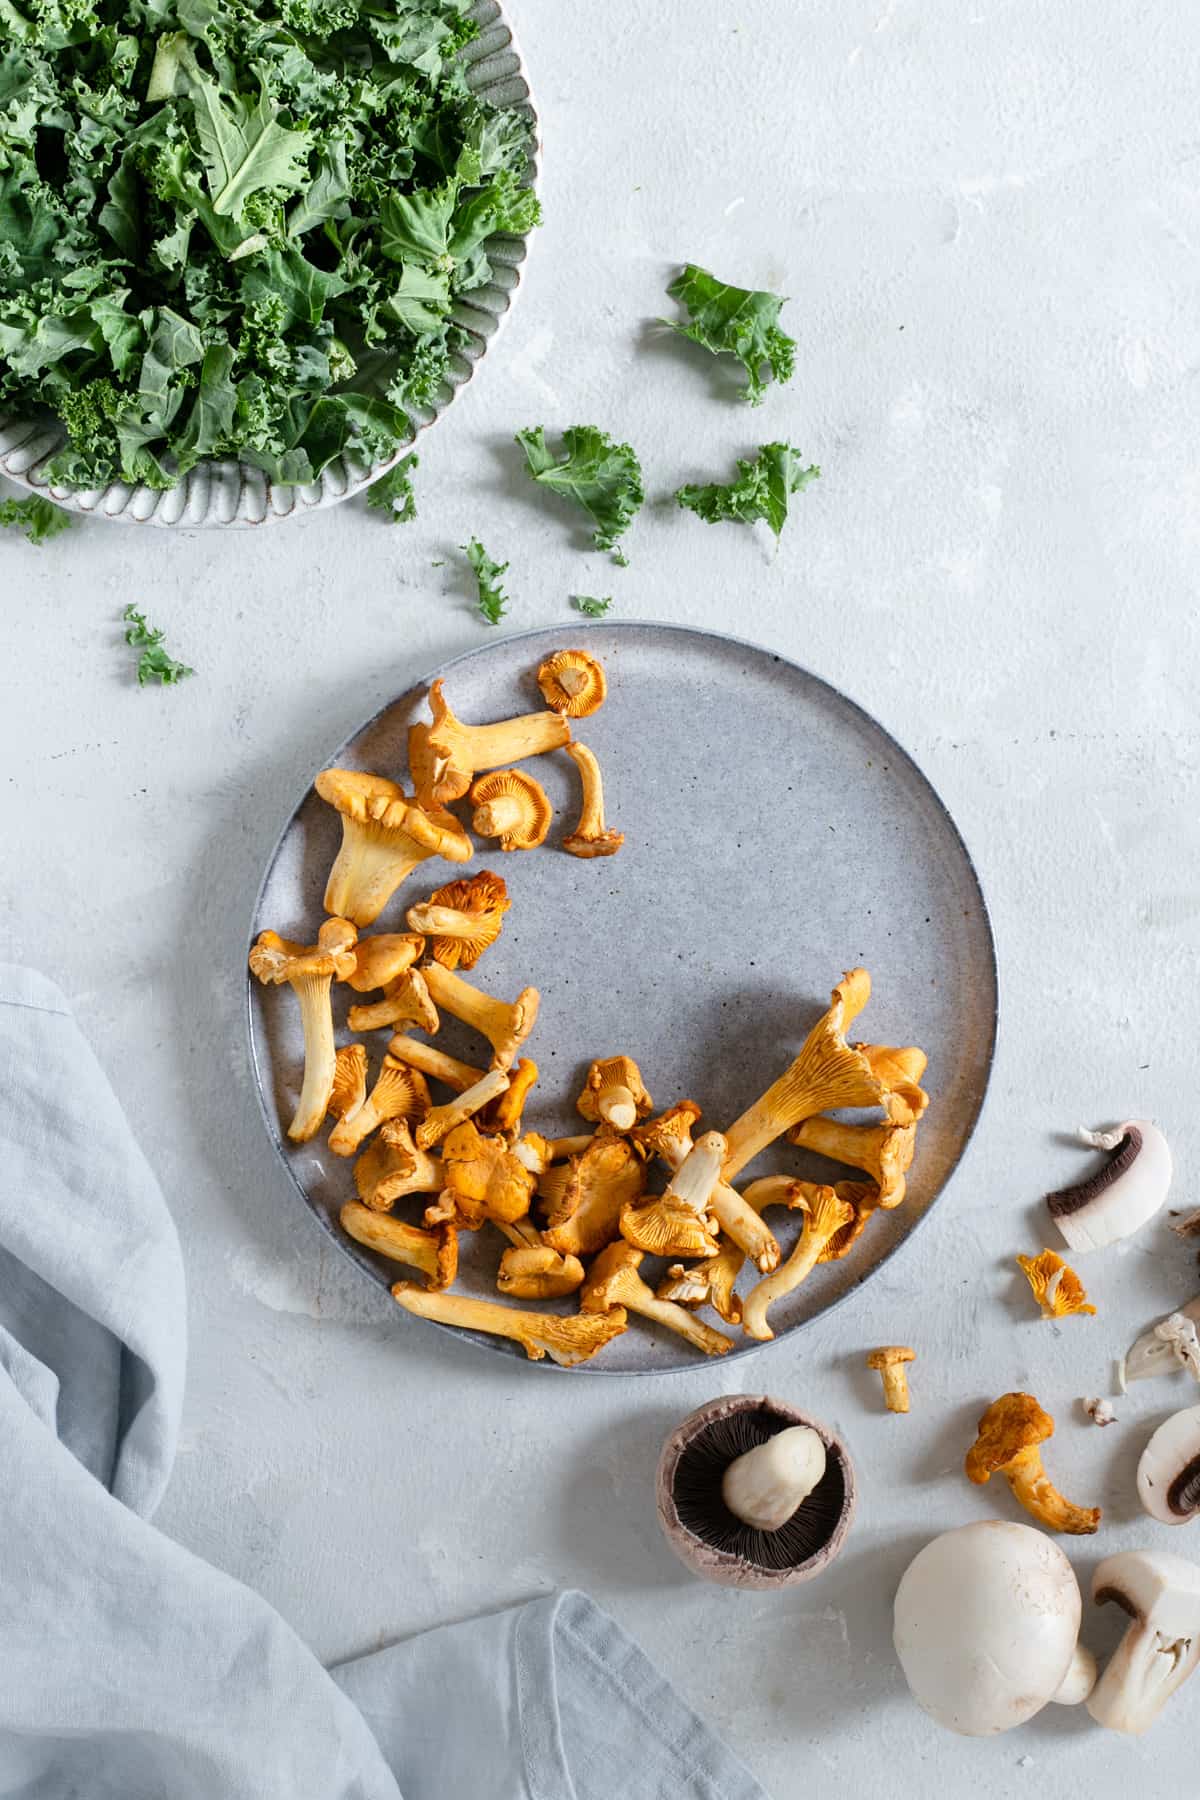 Plate with fresh curly kale and plate with chanterelle mushrooms